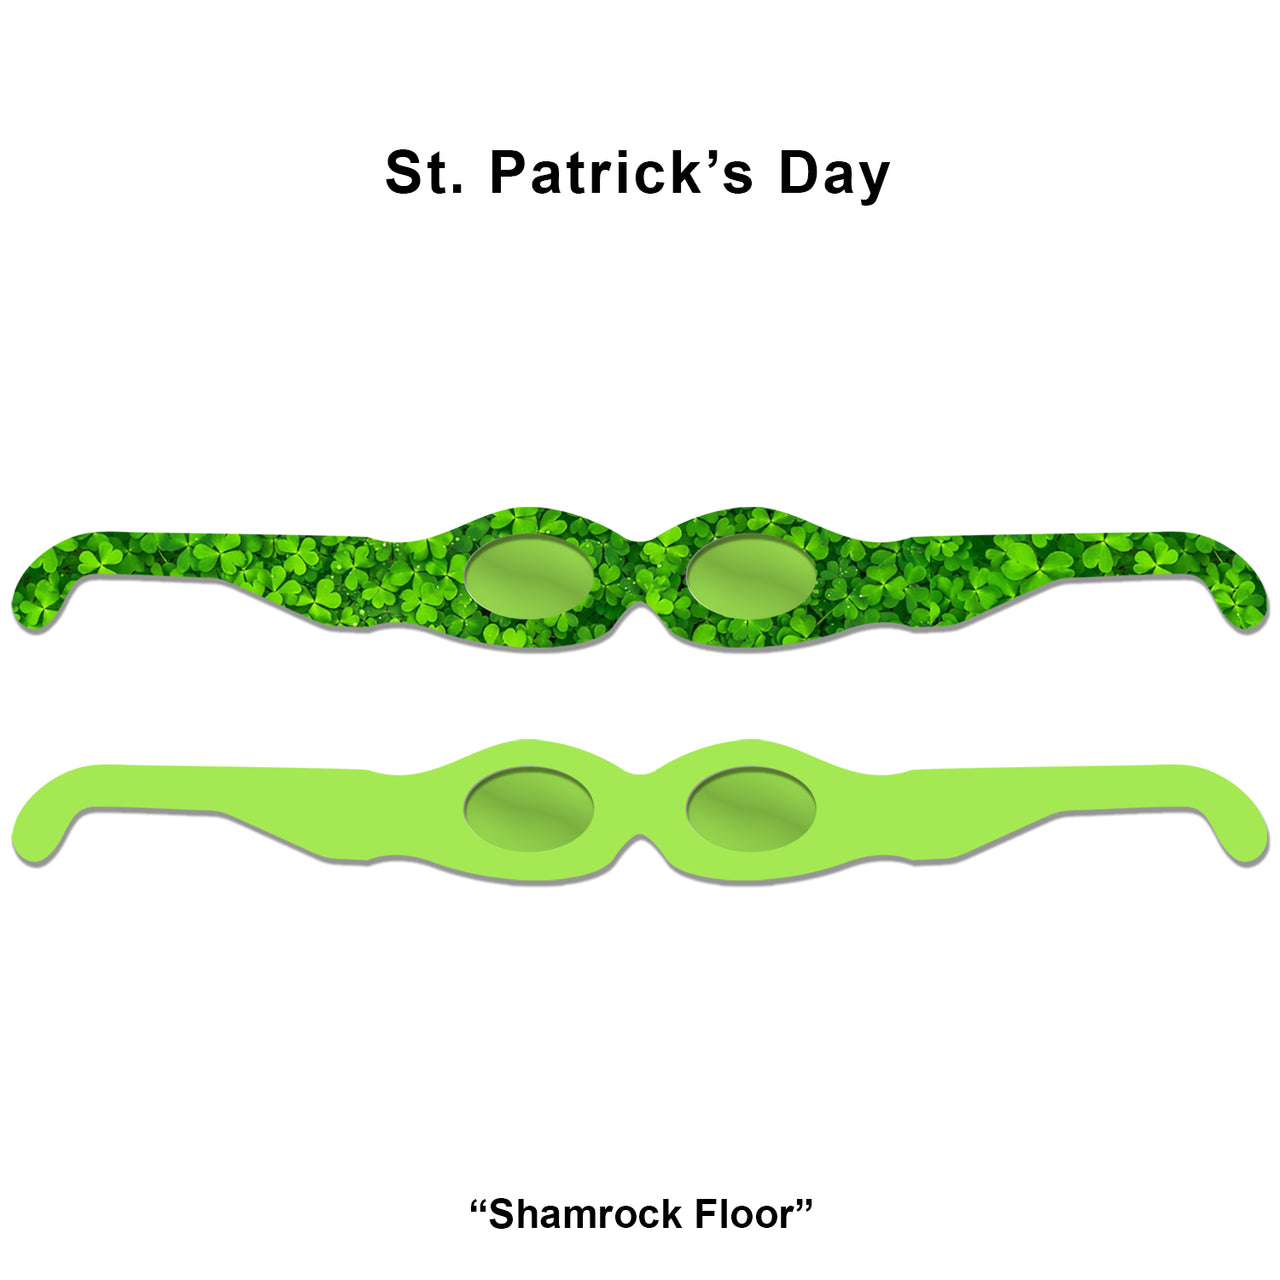 St. Patrick's Day Shades - American Paperwear